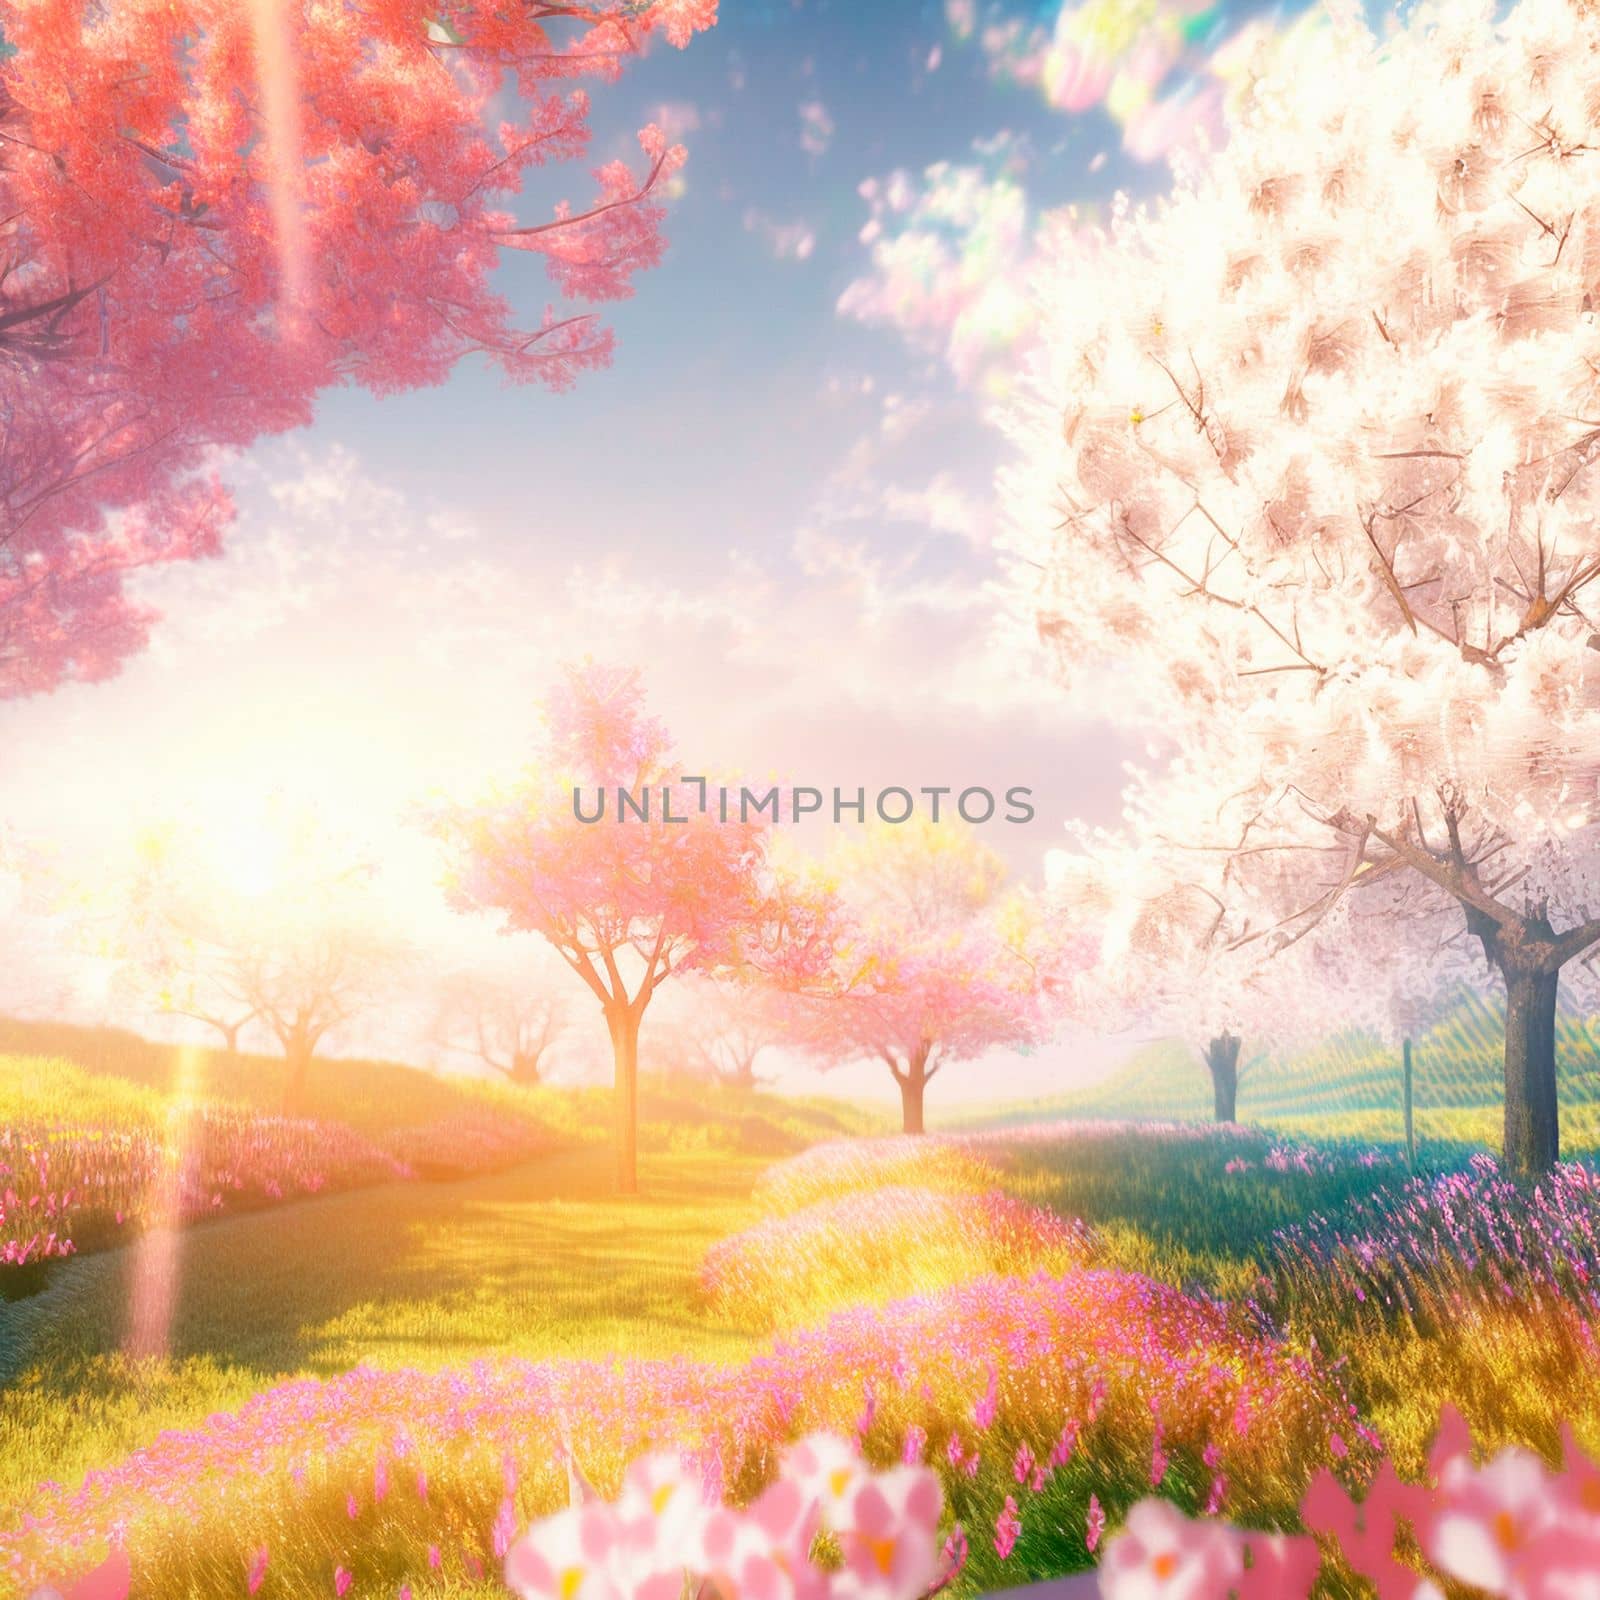 illustration of a fantasy spring world with bright sun and cherry blossoms. High quality illustration